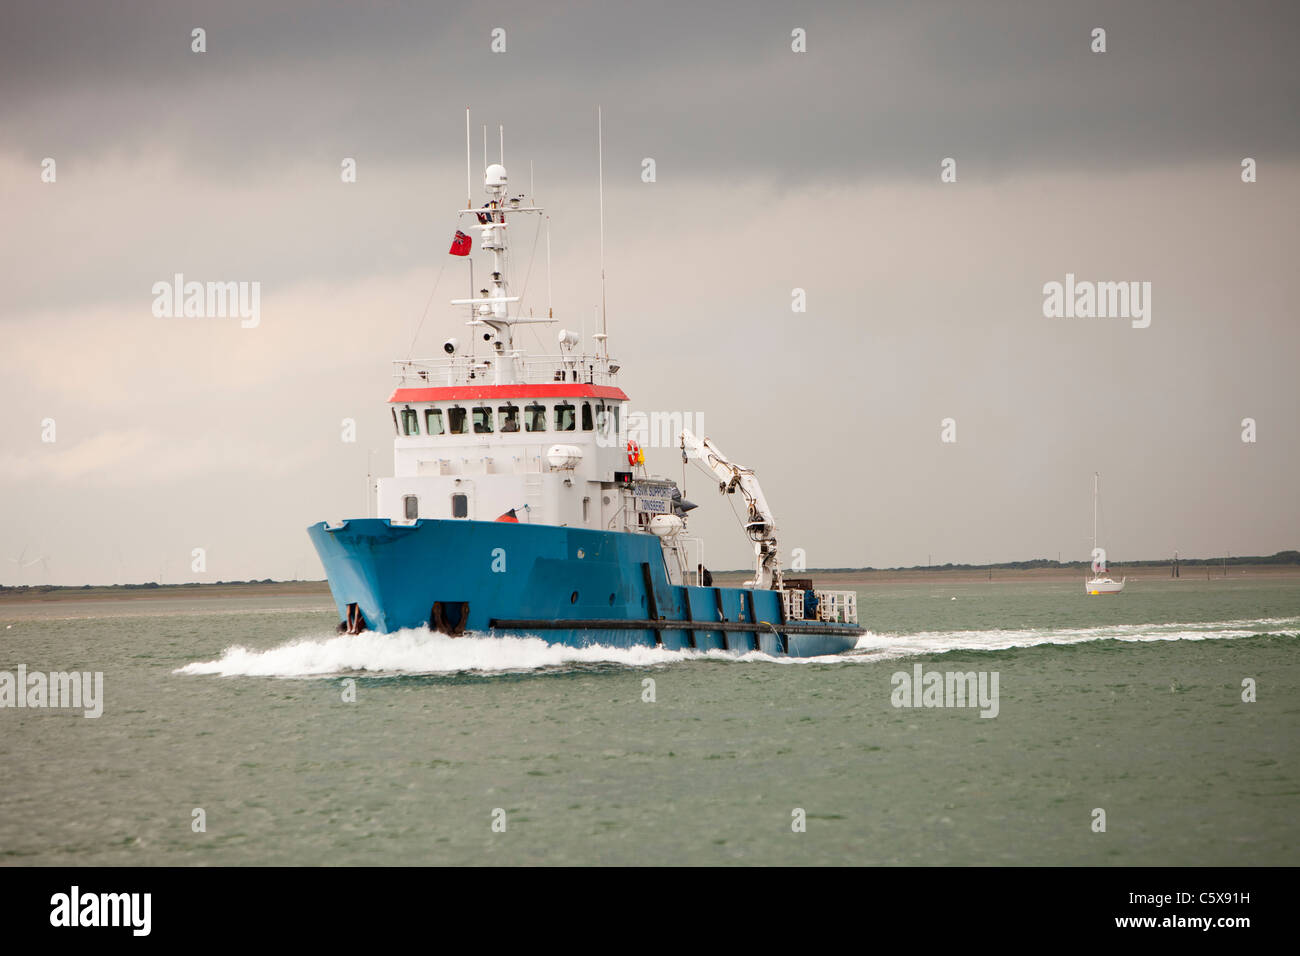 A vessel in the Walney Channel off Barrow in Furness, Cumbria, UK. Stock Photo